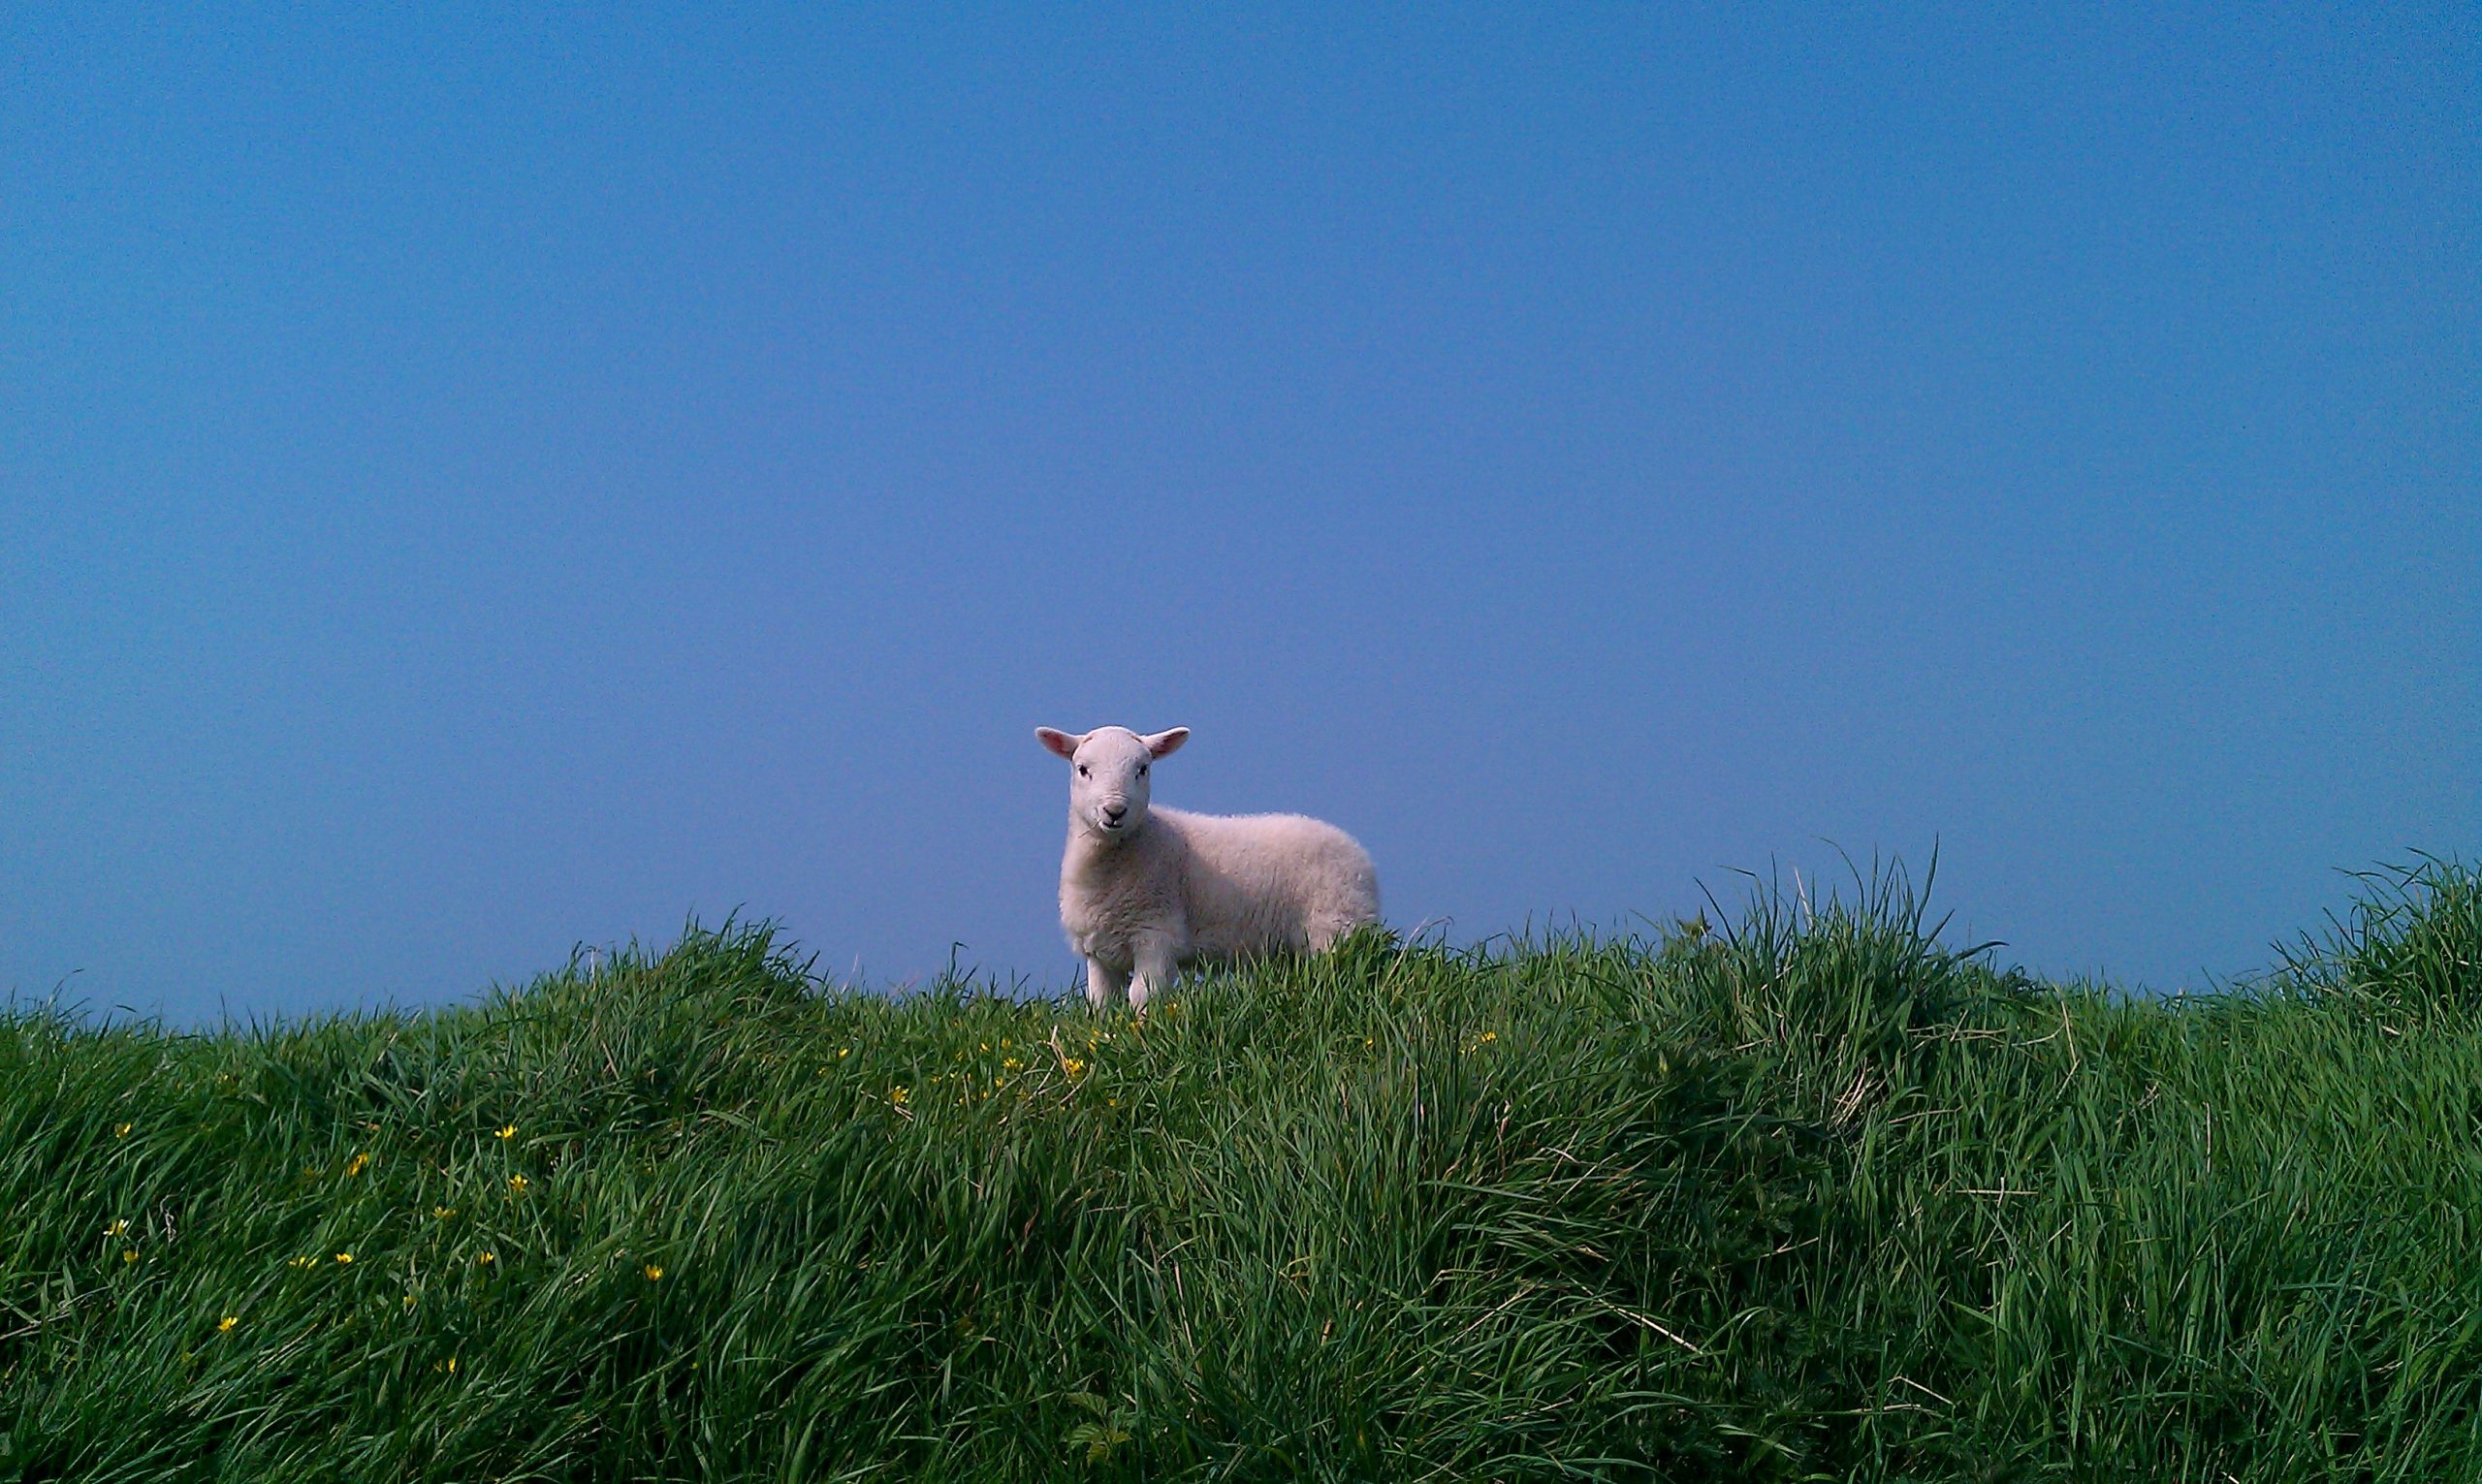 Fluffy white lamb standing in a grassy field on a sunny day.